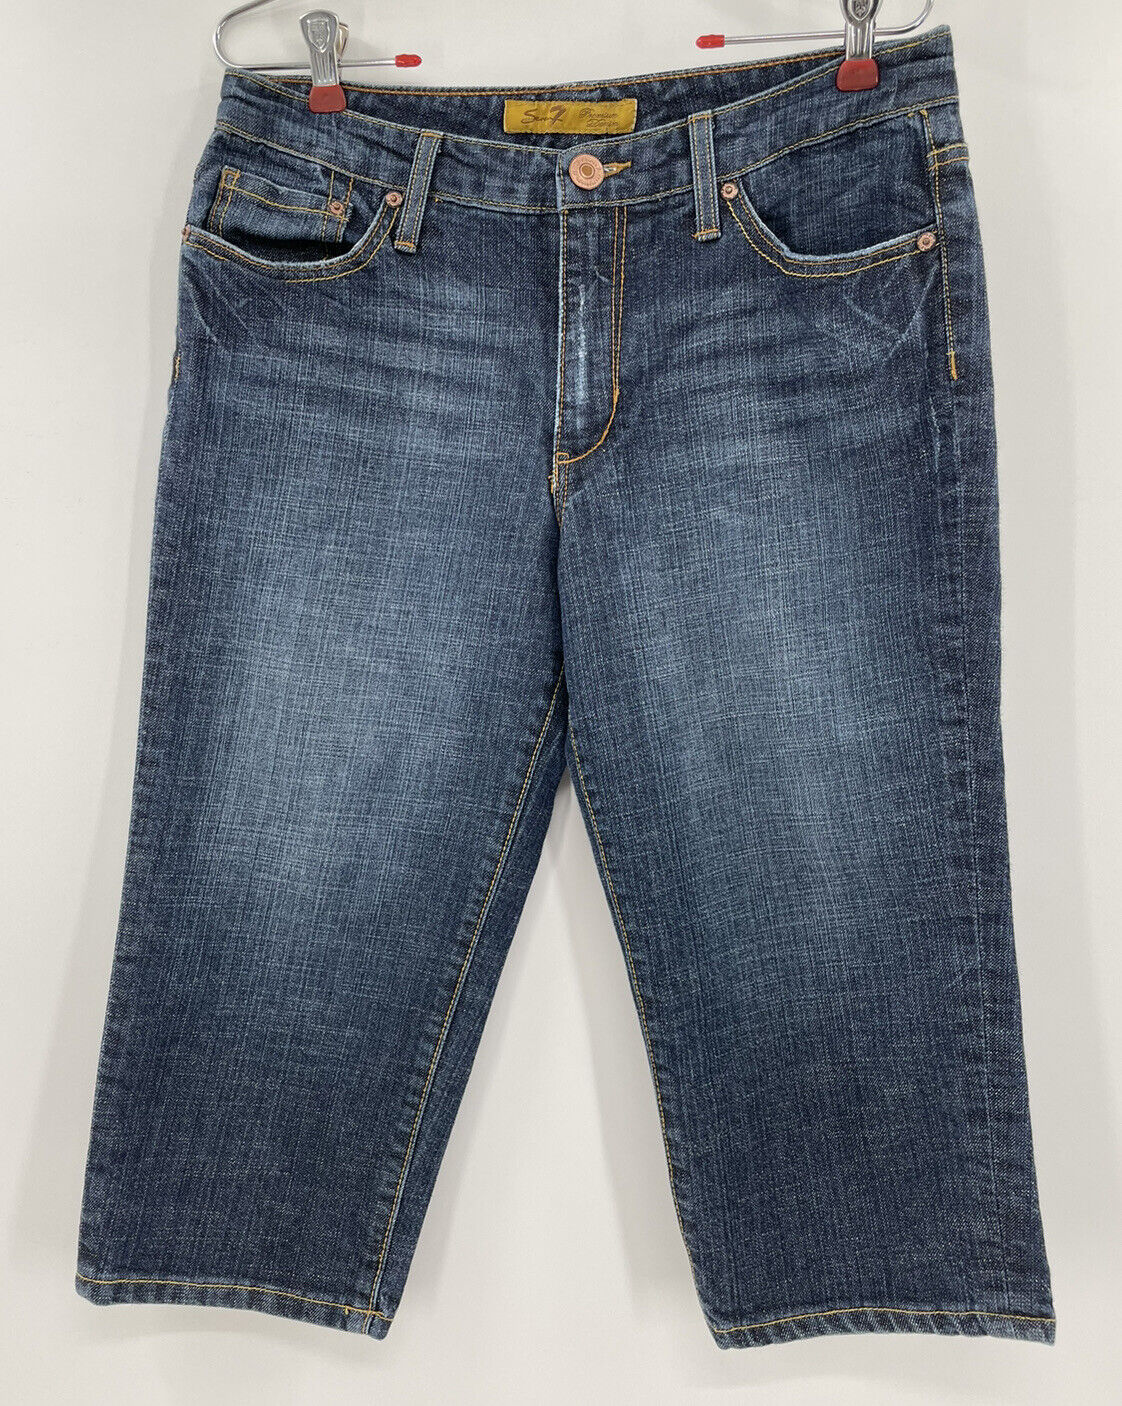 Women’s Seven7 Cropped Jeans Distressed Size 10